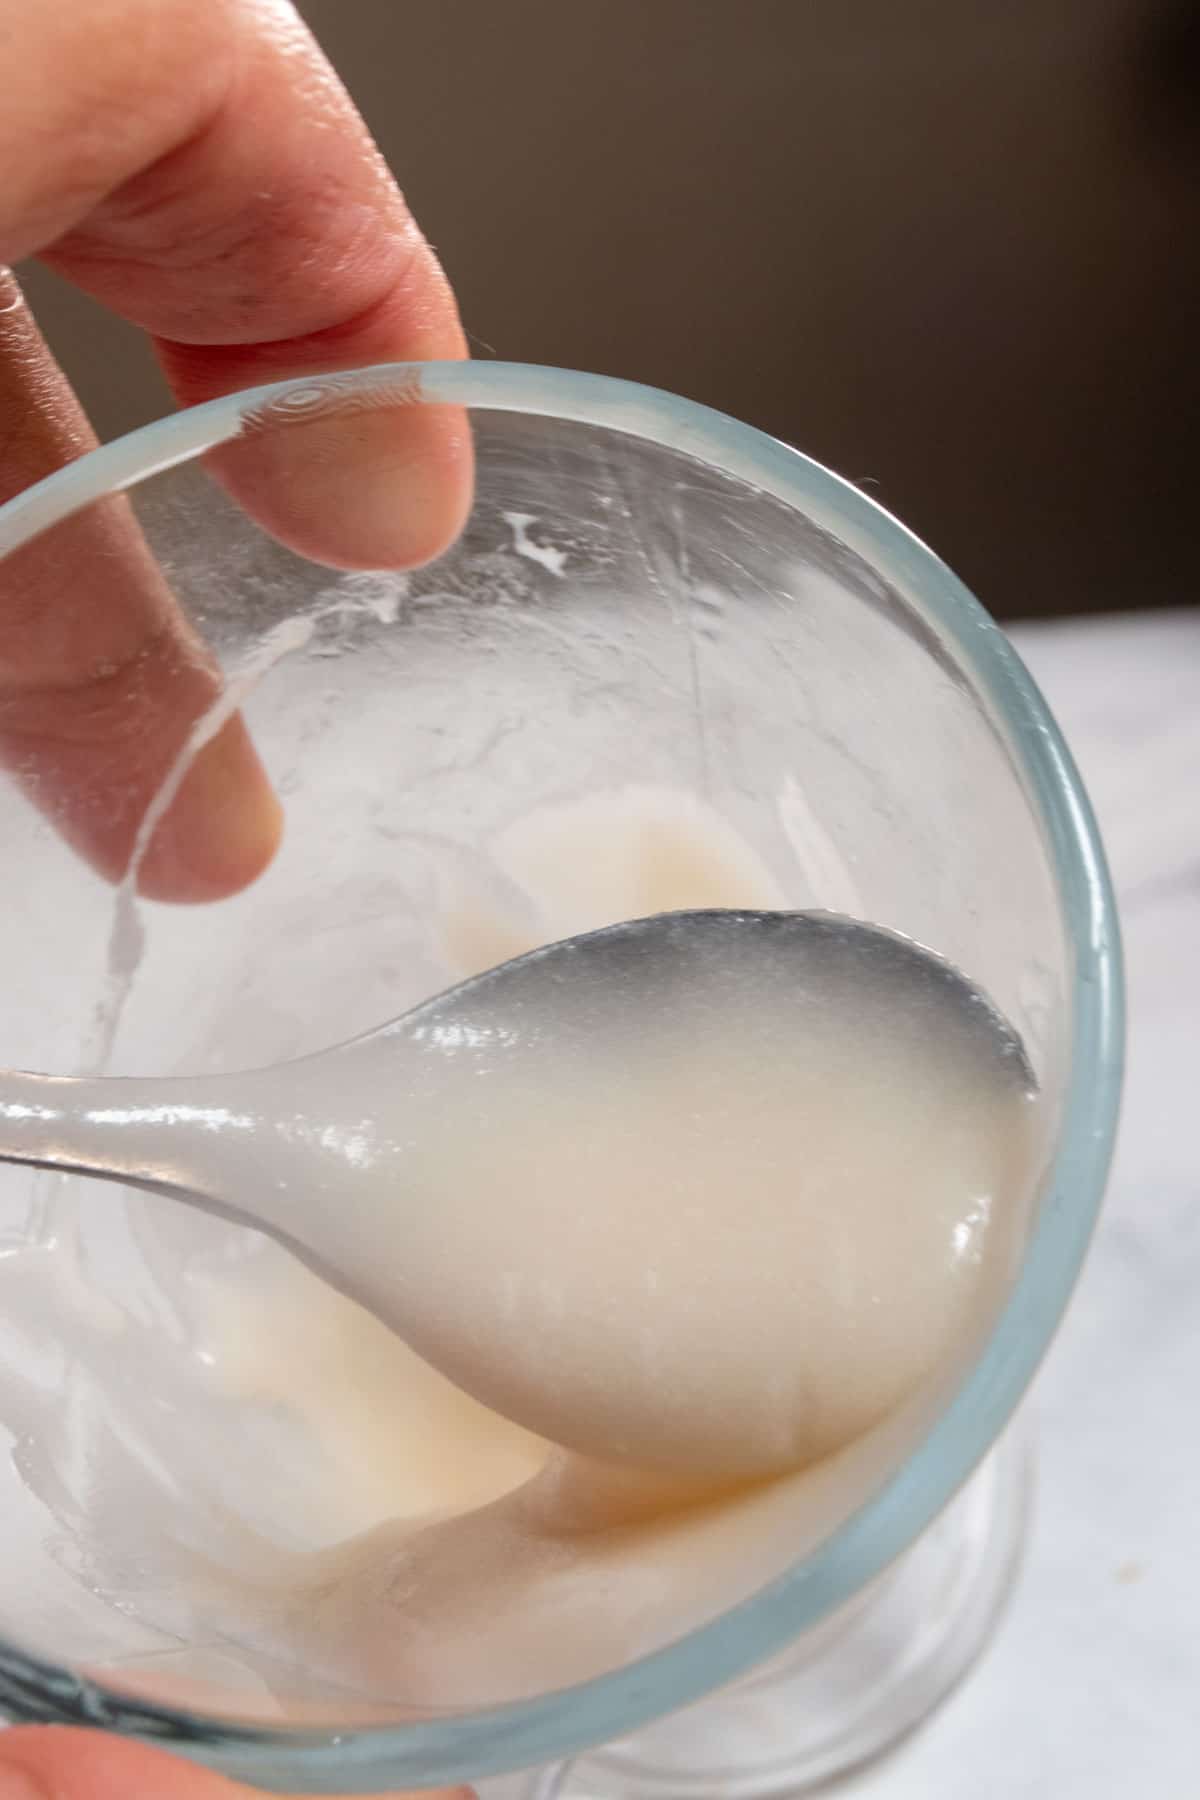 A spoonful of condensed milk inside a glass.